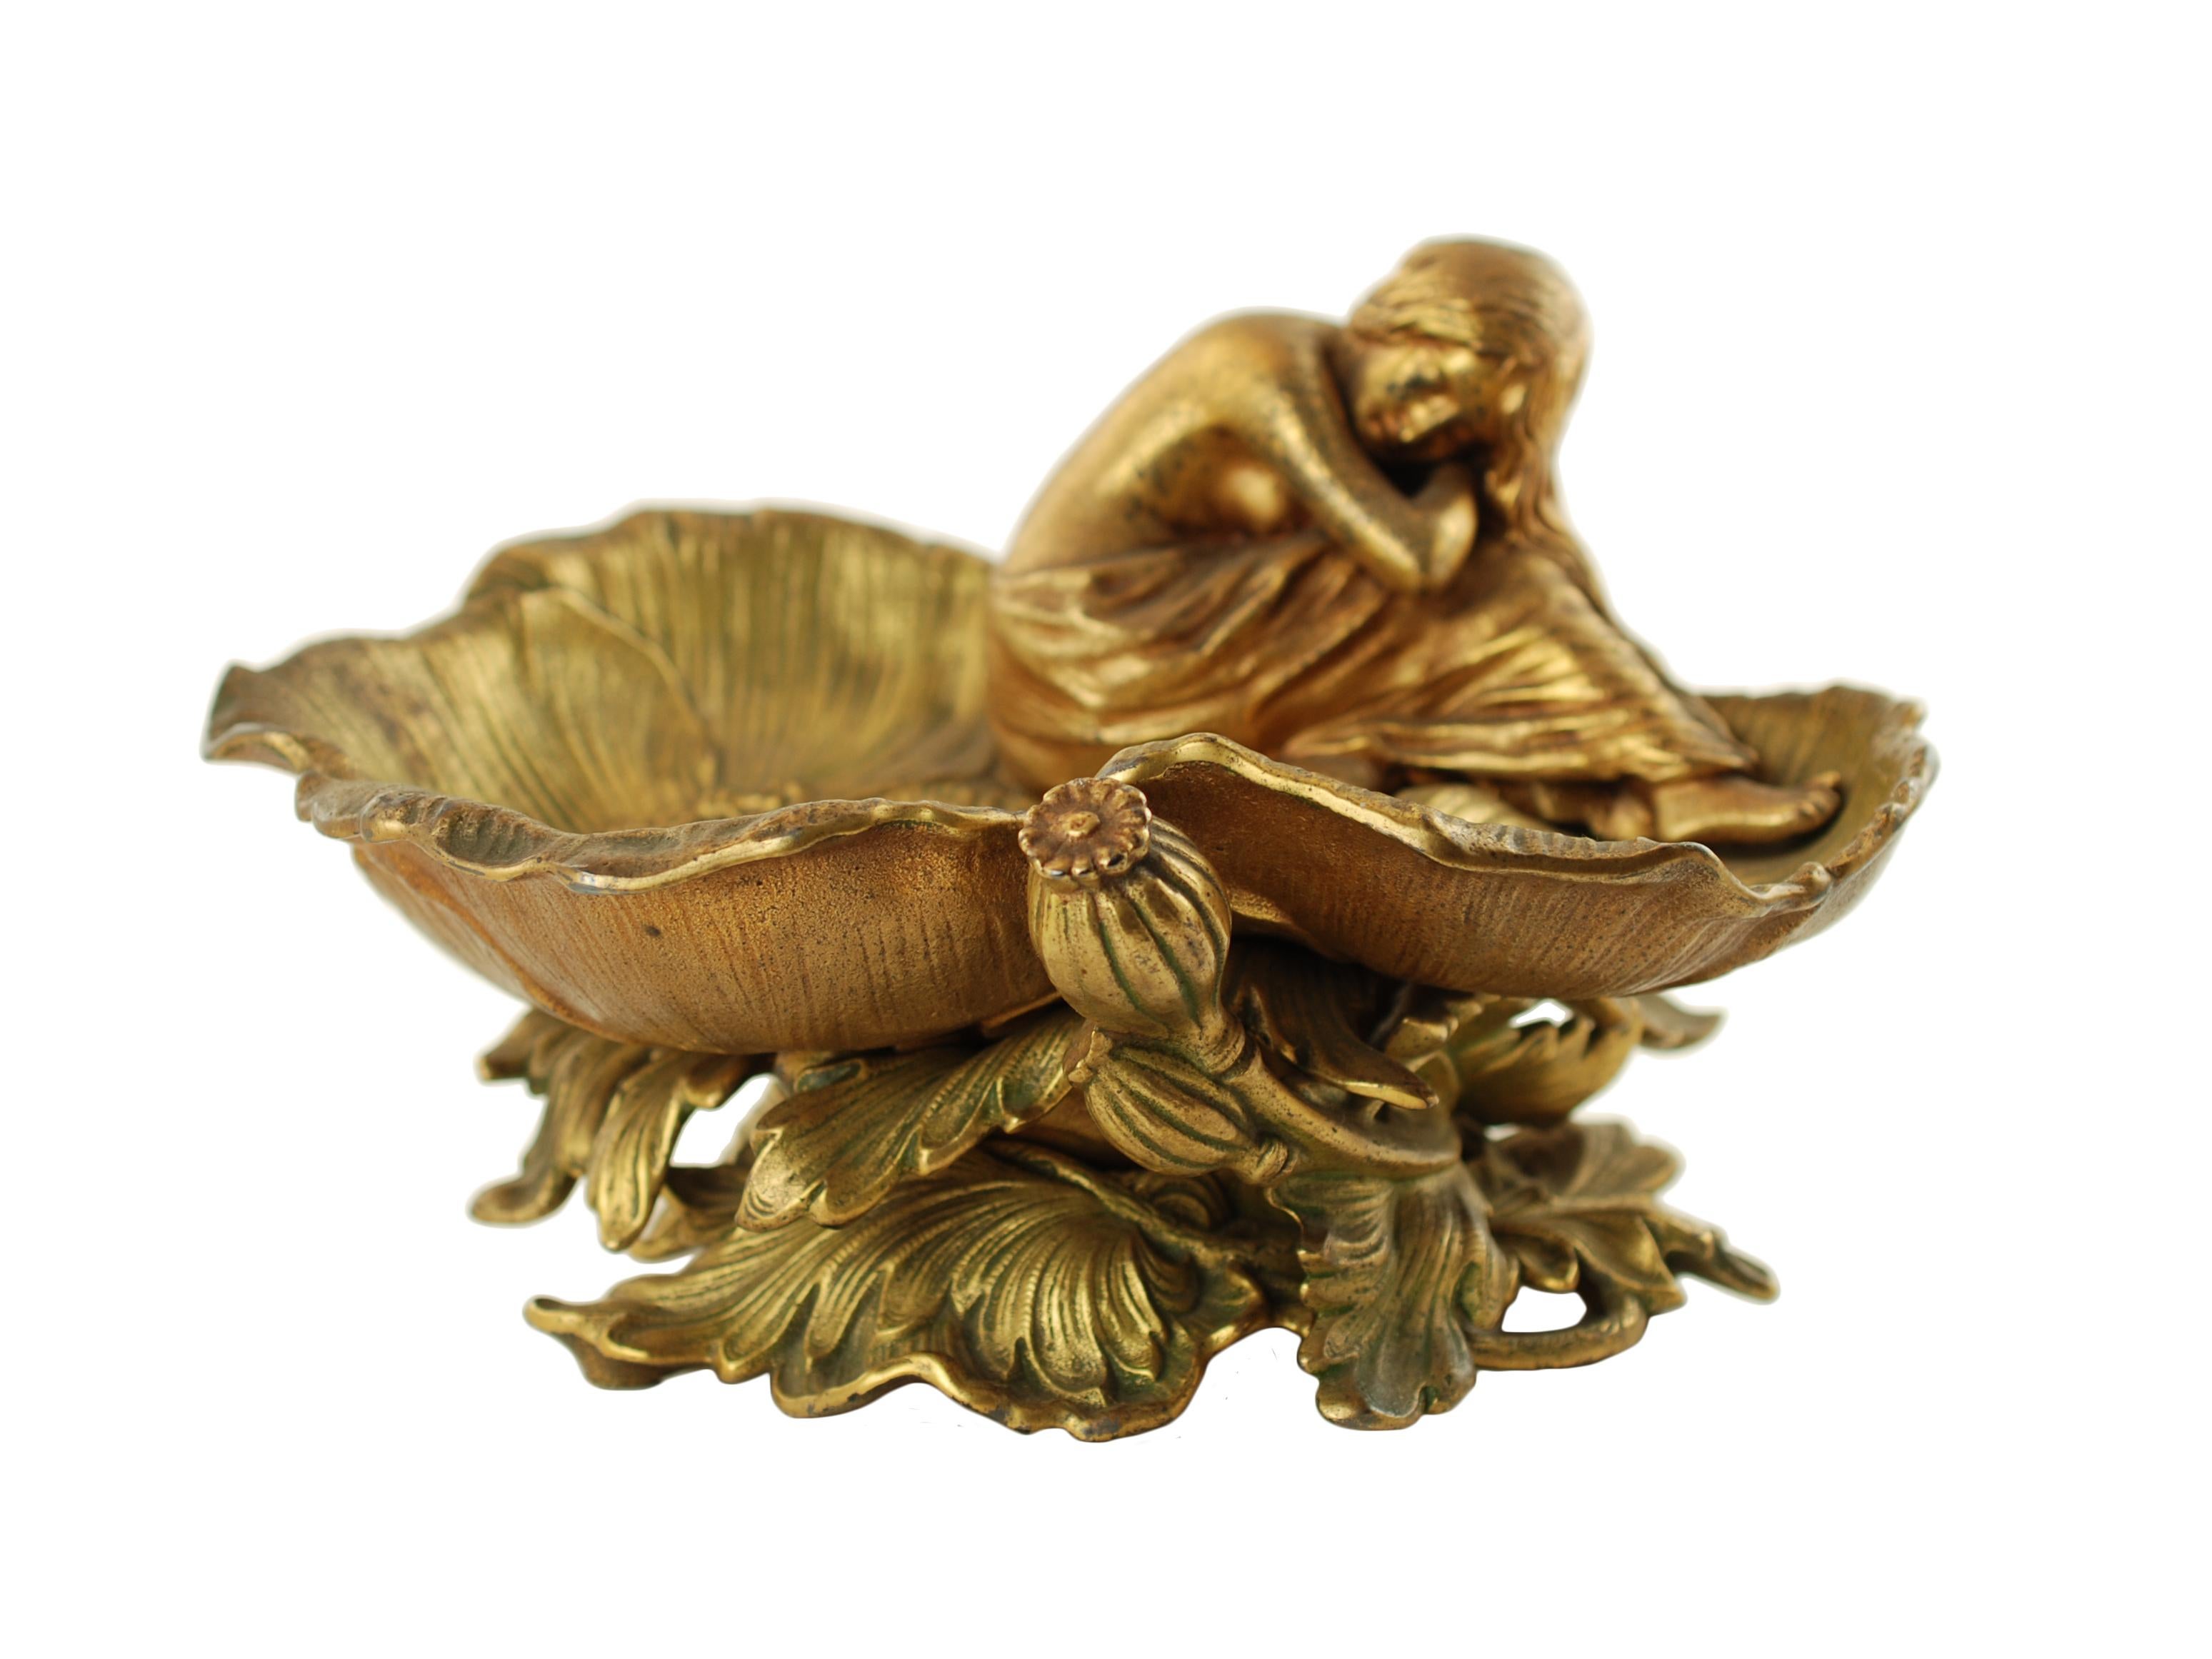 This heavy centerpiece bowl dates to the late 19th century and is composed of cast iron with a gilt finish. The bowl has a shallow basin made up of a series of detailed open poppy blossoms and features a sleeping maiden curled up at one side. The